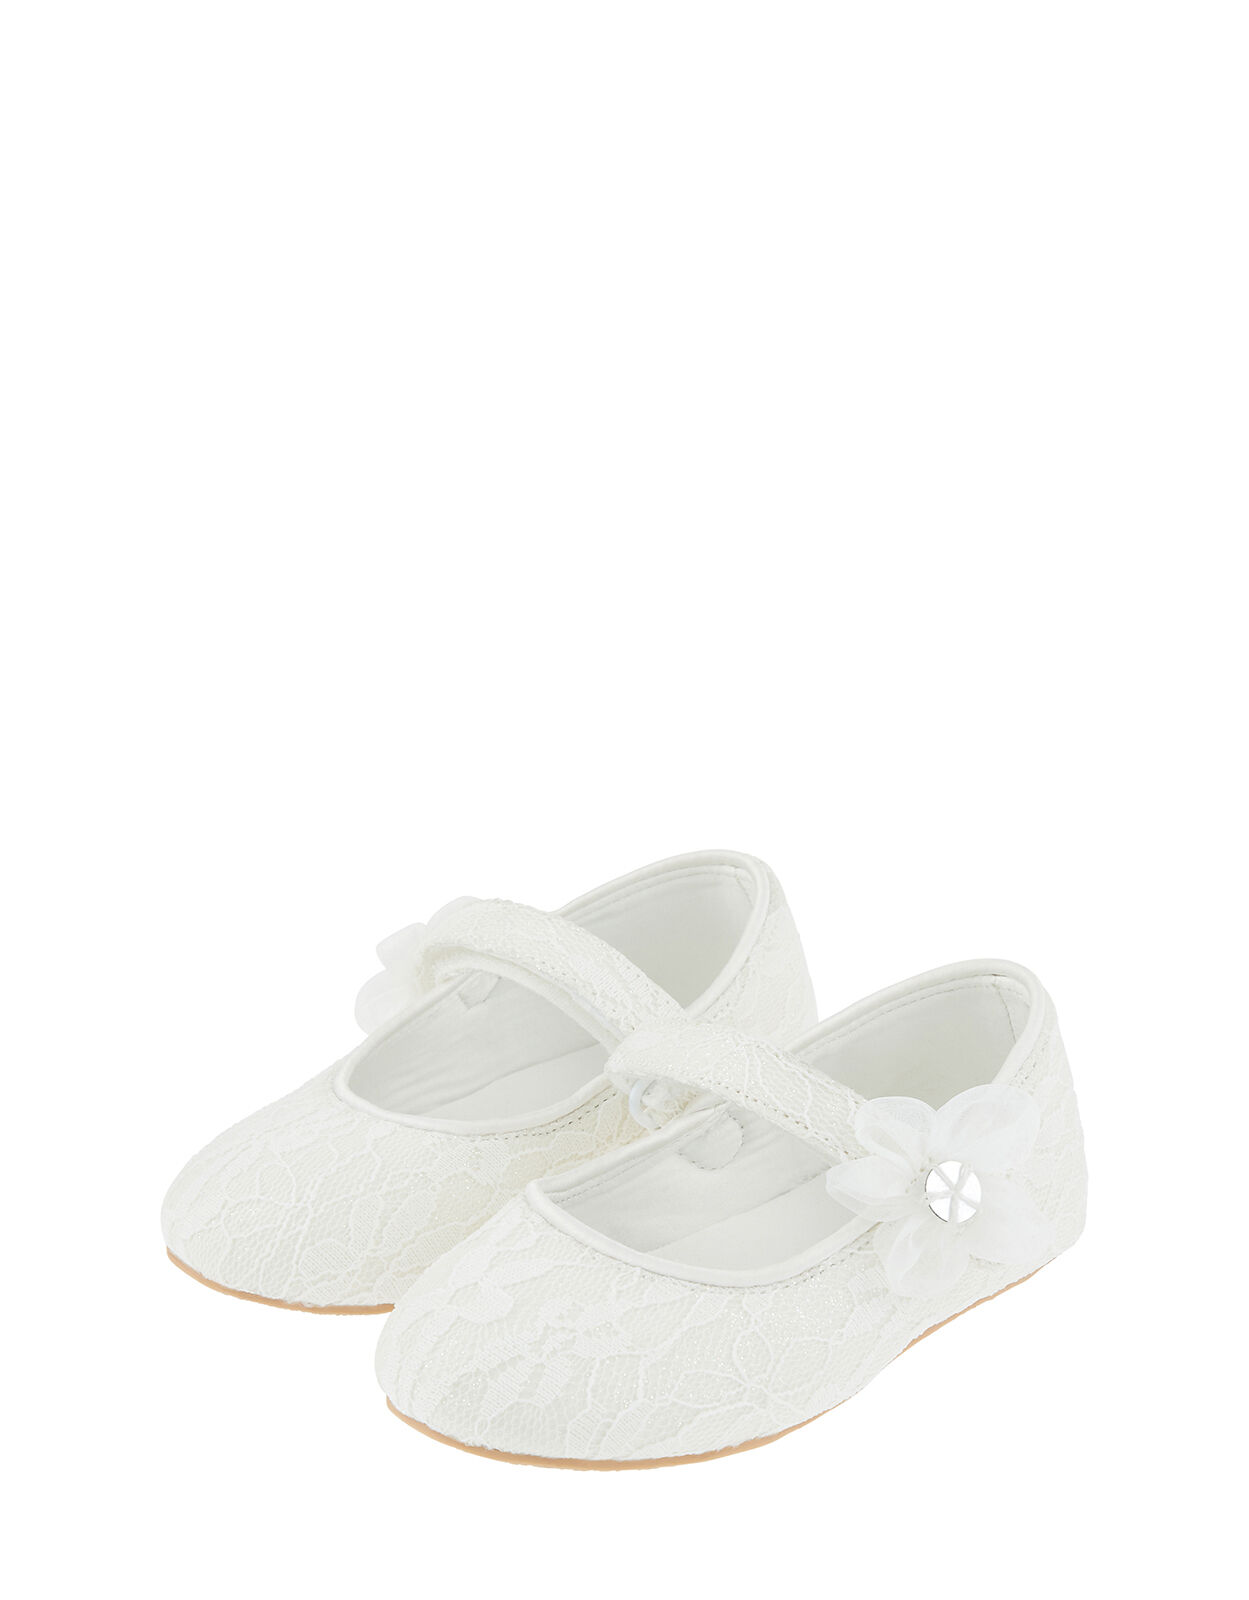 baby gold shoes uk